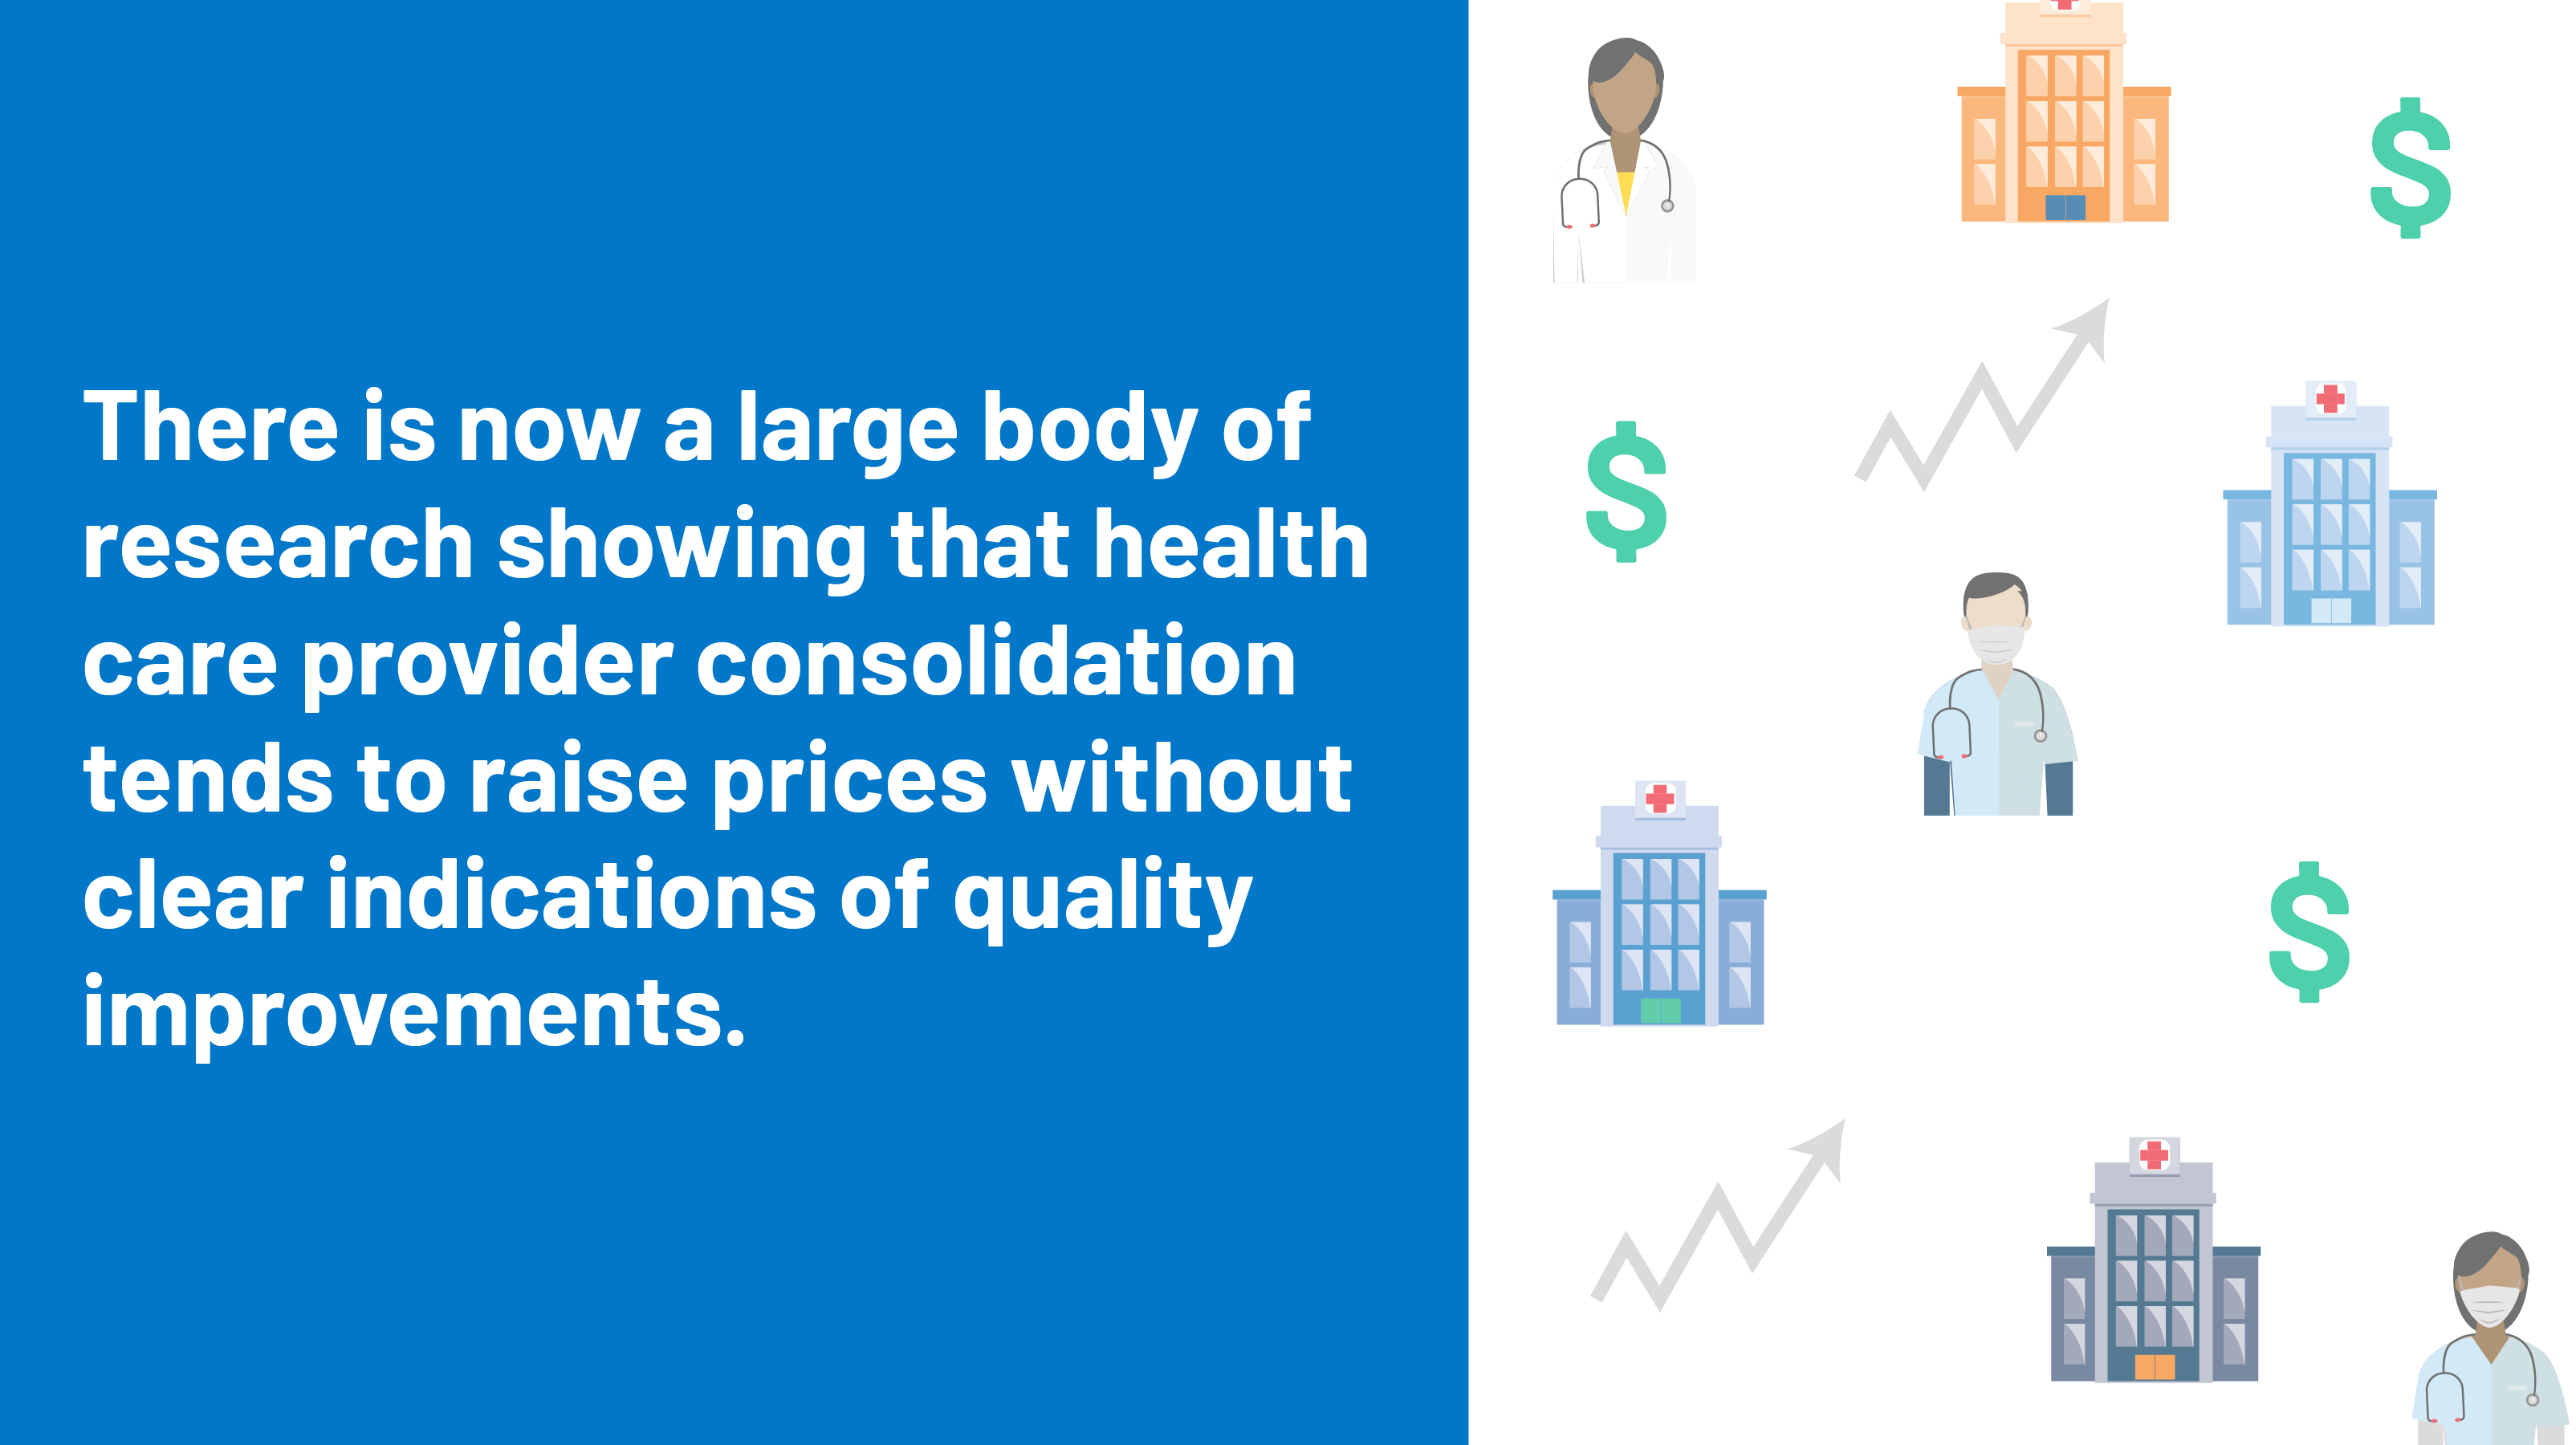 What We Know About Provider Consolidation